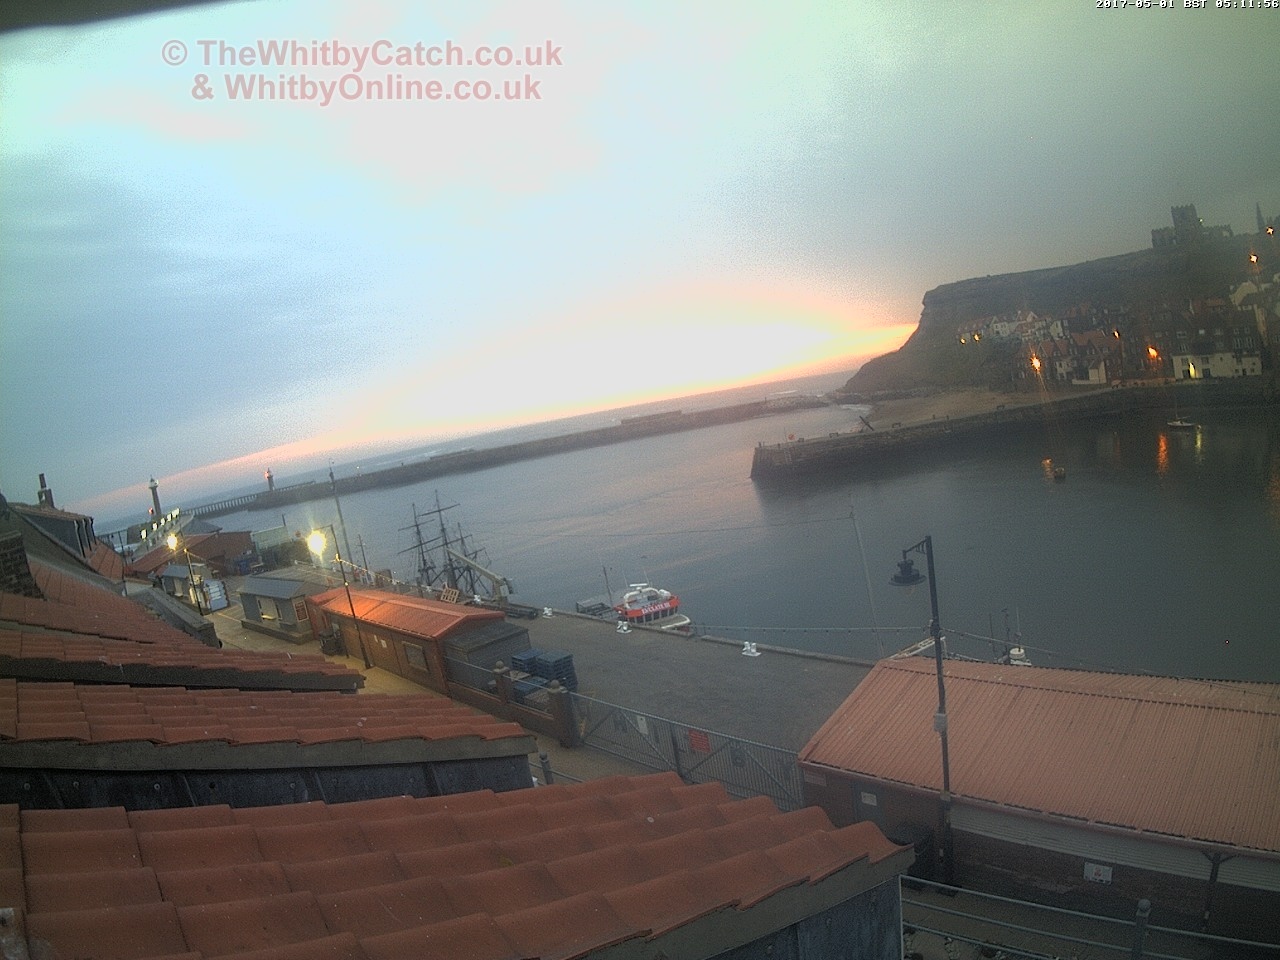 Whitby Mon 1st May 2017 05:12.